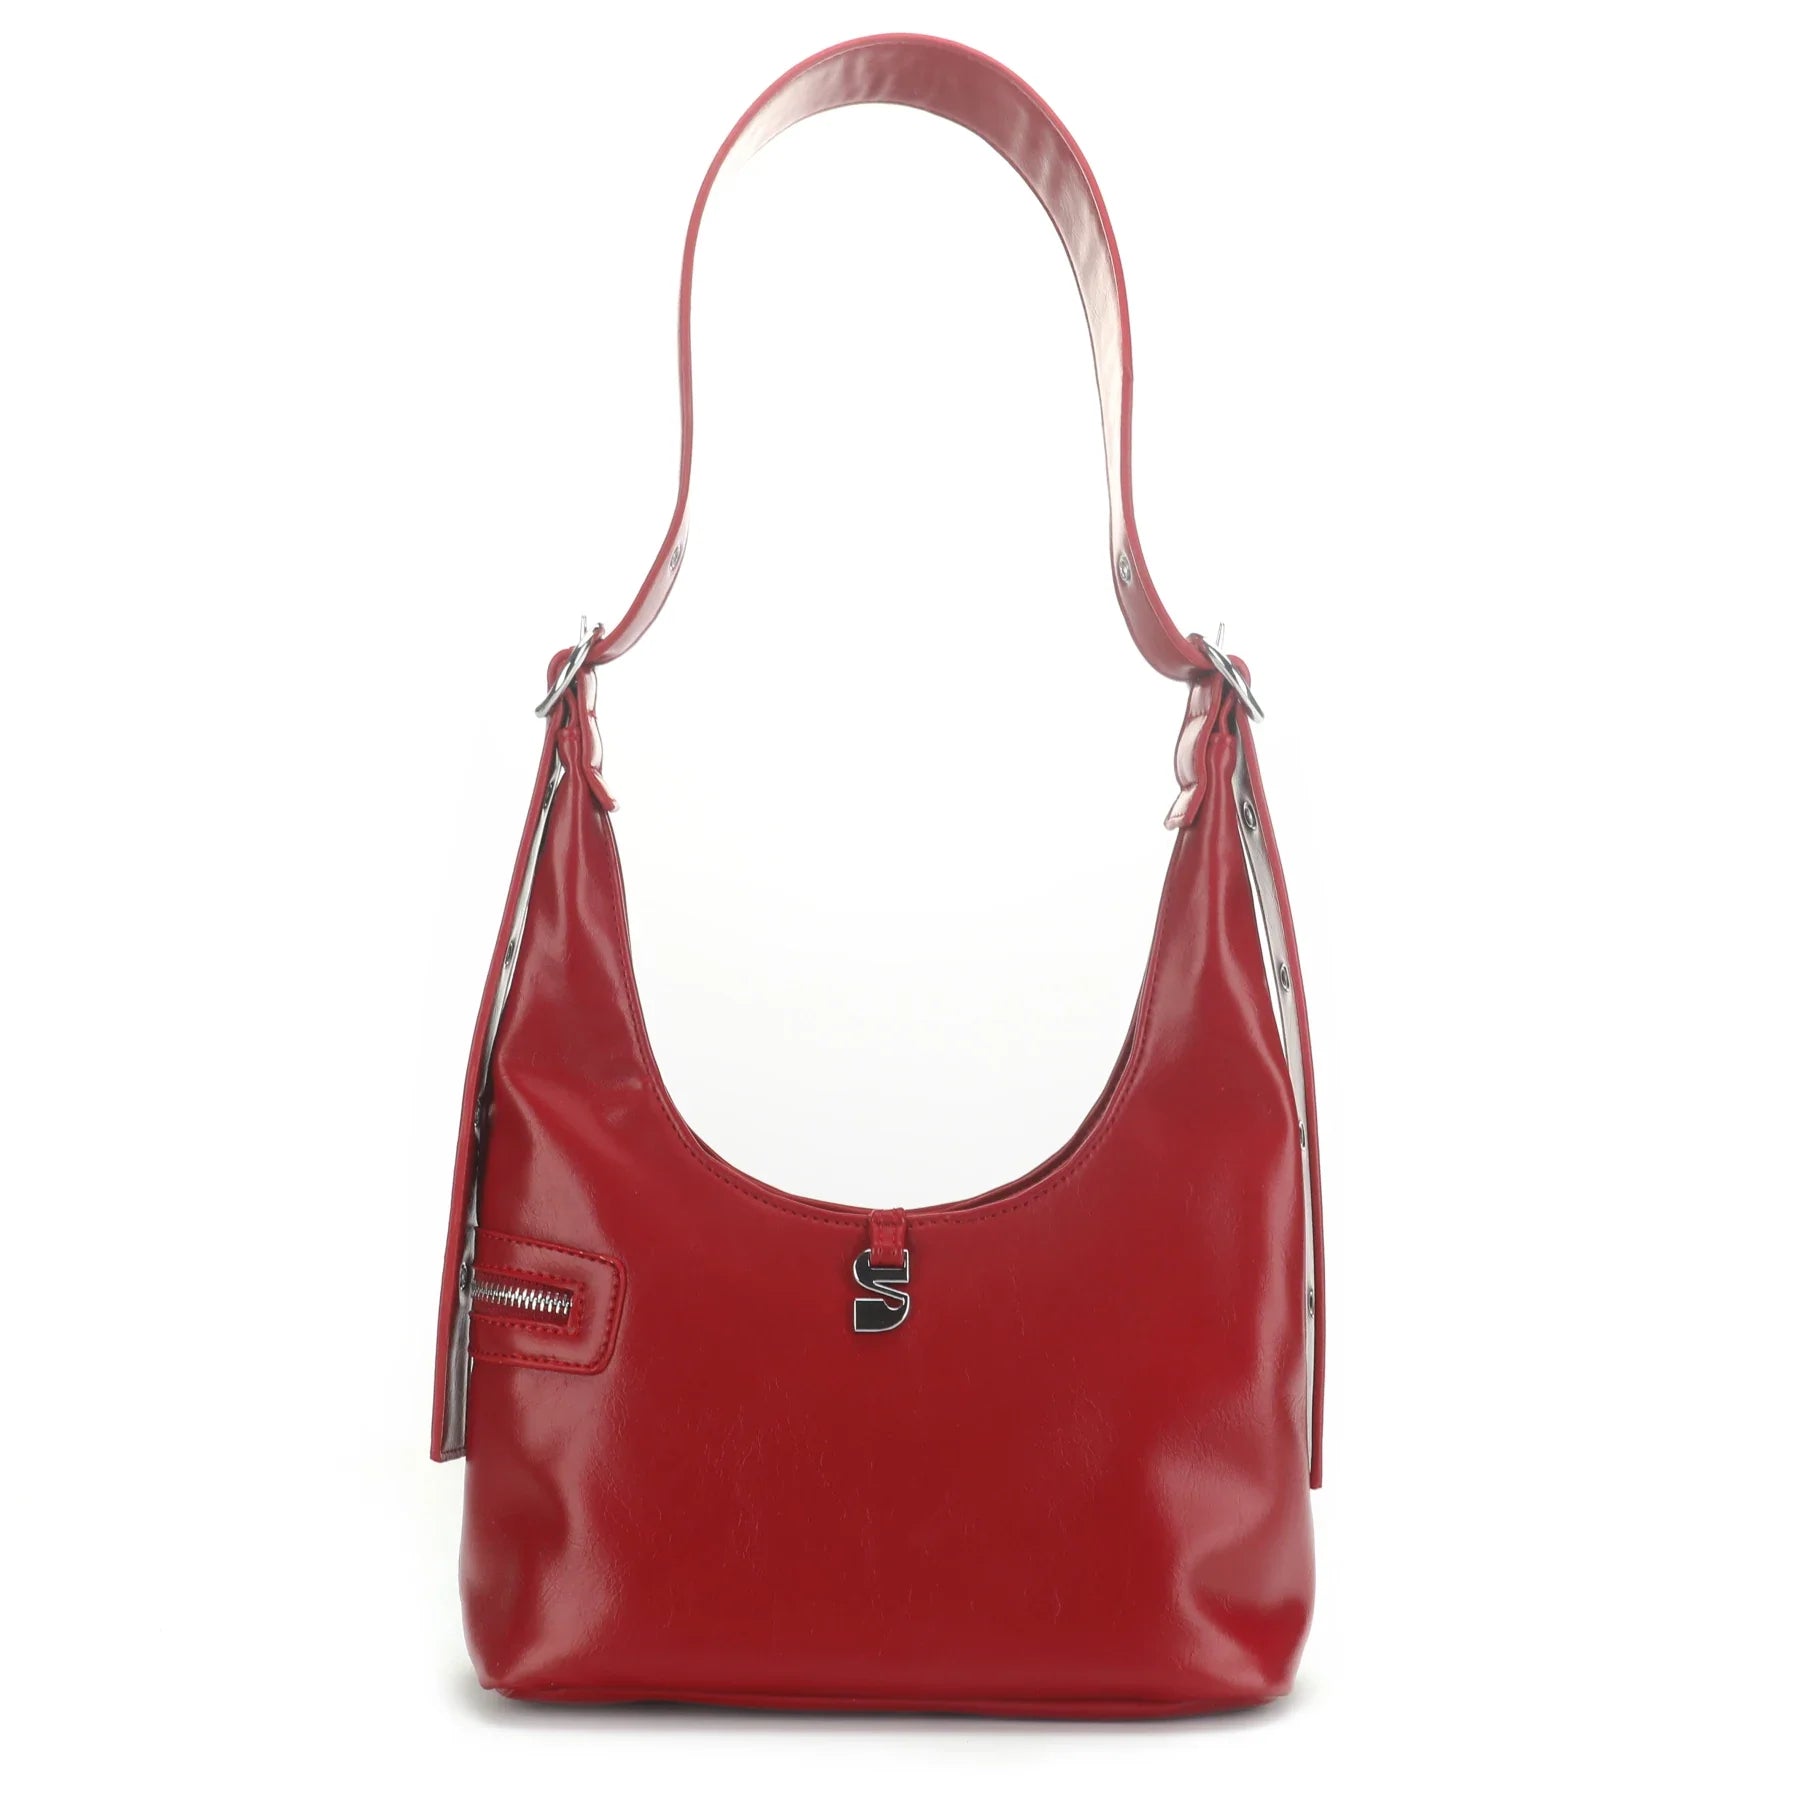 PRE | FALL EXCLUSIVE - THE LOTTA SHOULDER BAG IN VEGAN LEATHER / WINE RED HUE - EXCLUSIVE Bags from SILFEN - Just €79.99! SHOP NOW AT IAMINHATELOVE BOTH IN STORE FOR CYPRUS AND ONLINE WORLDWIDE @ IAMINHATELOVE.COM